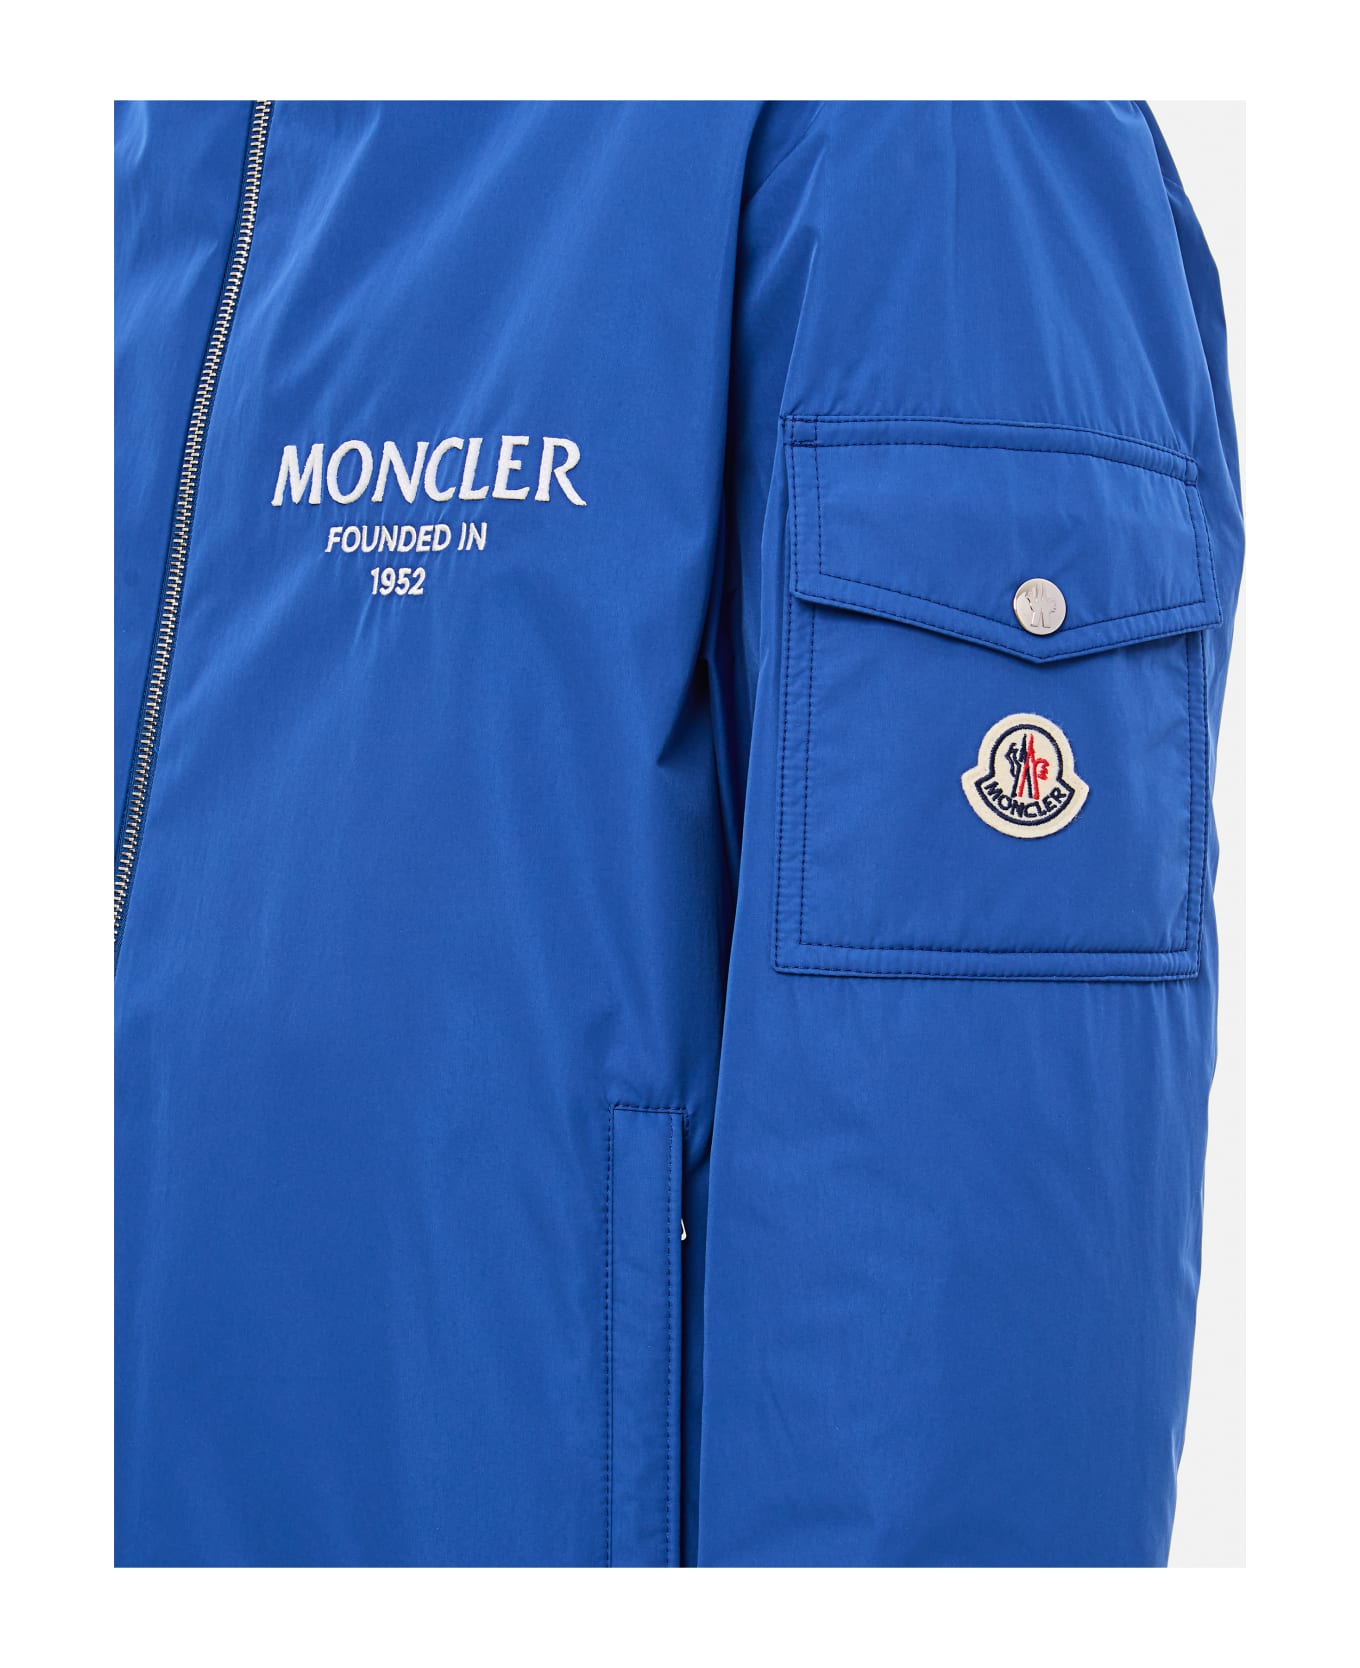 Moncler Granero Jacket - Clear Blue ブレザー